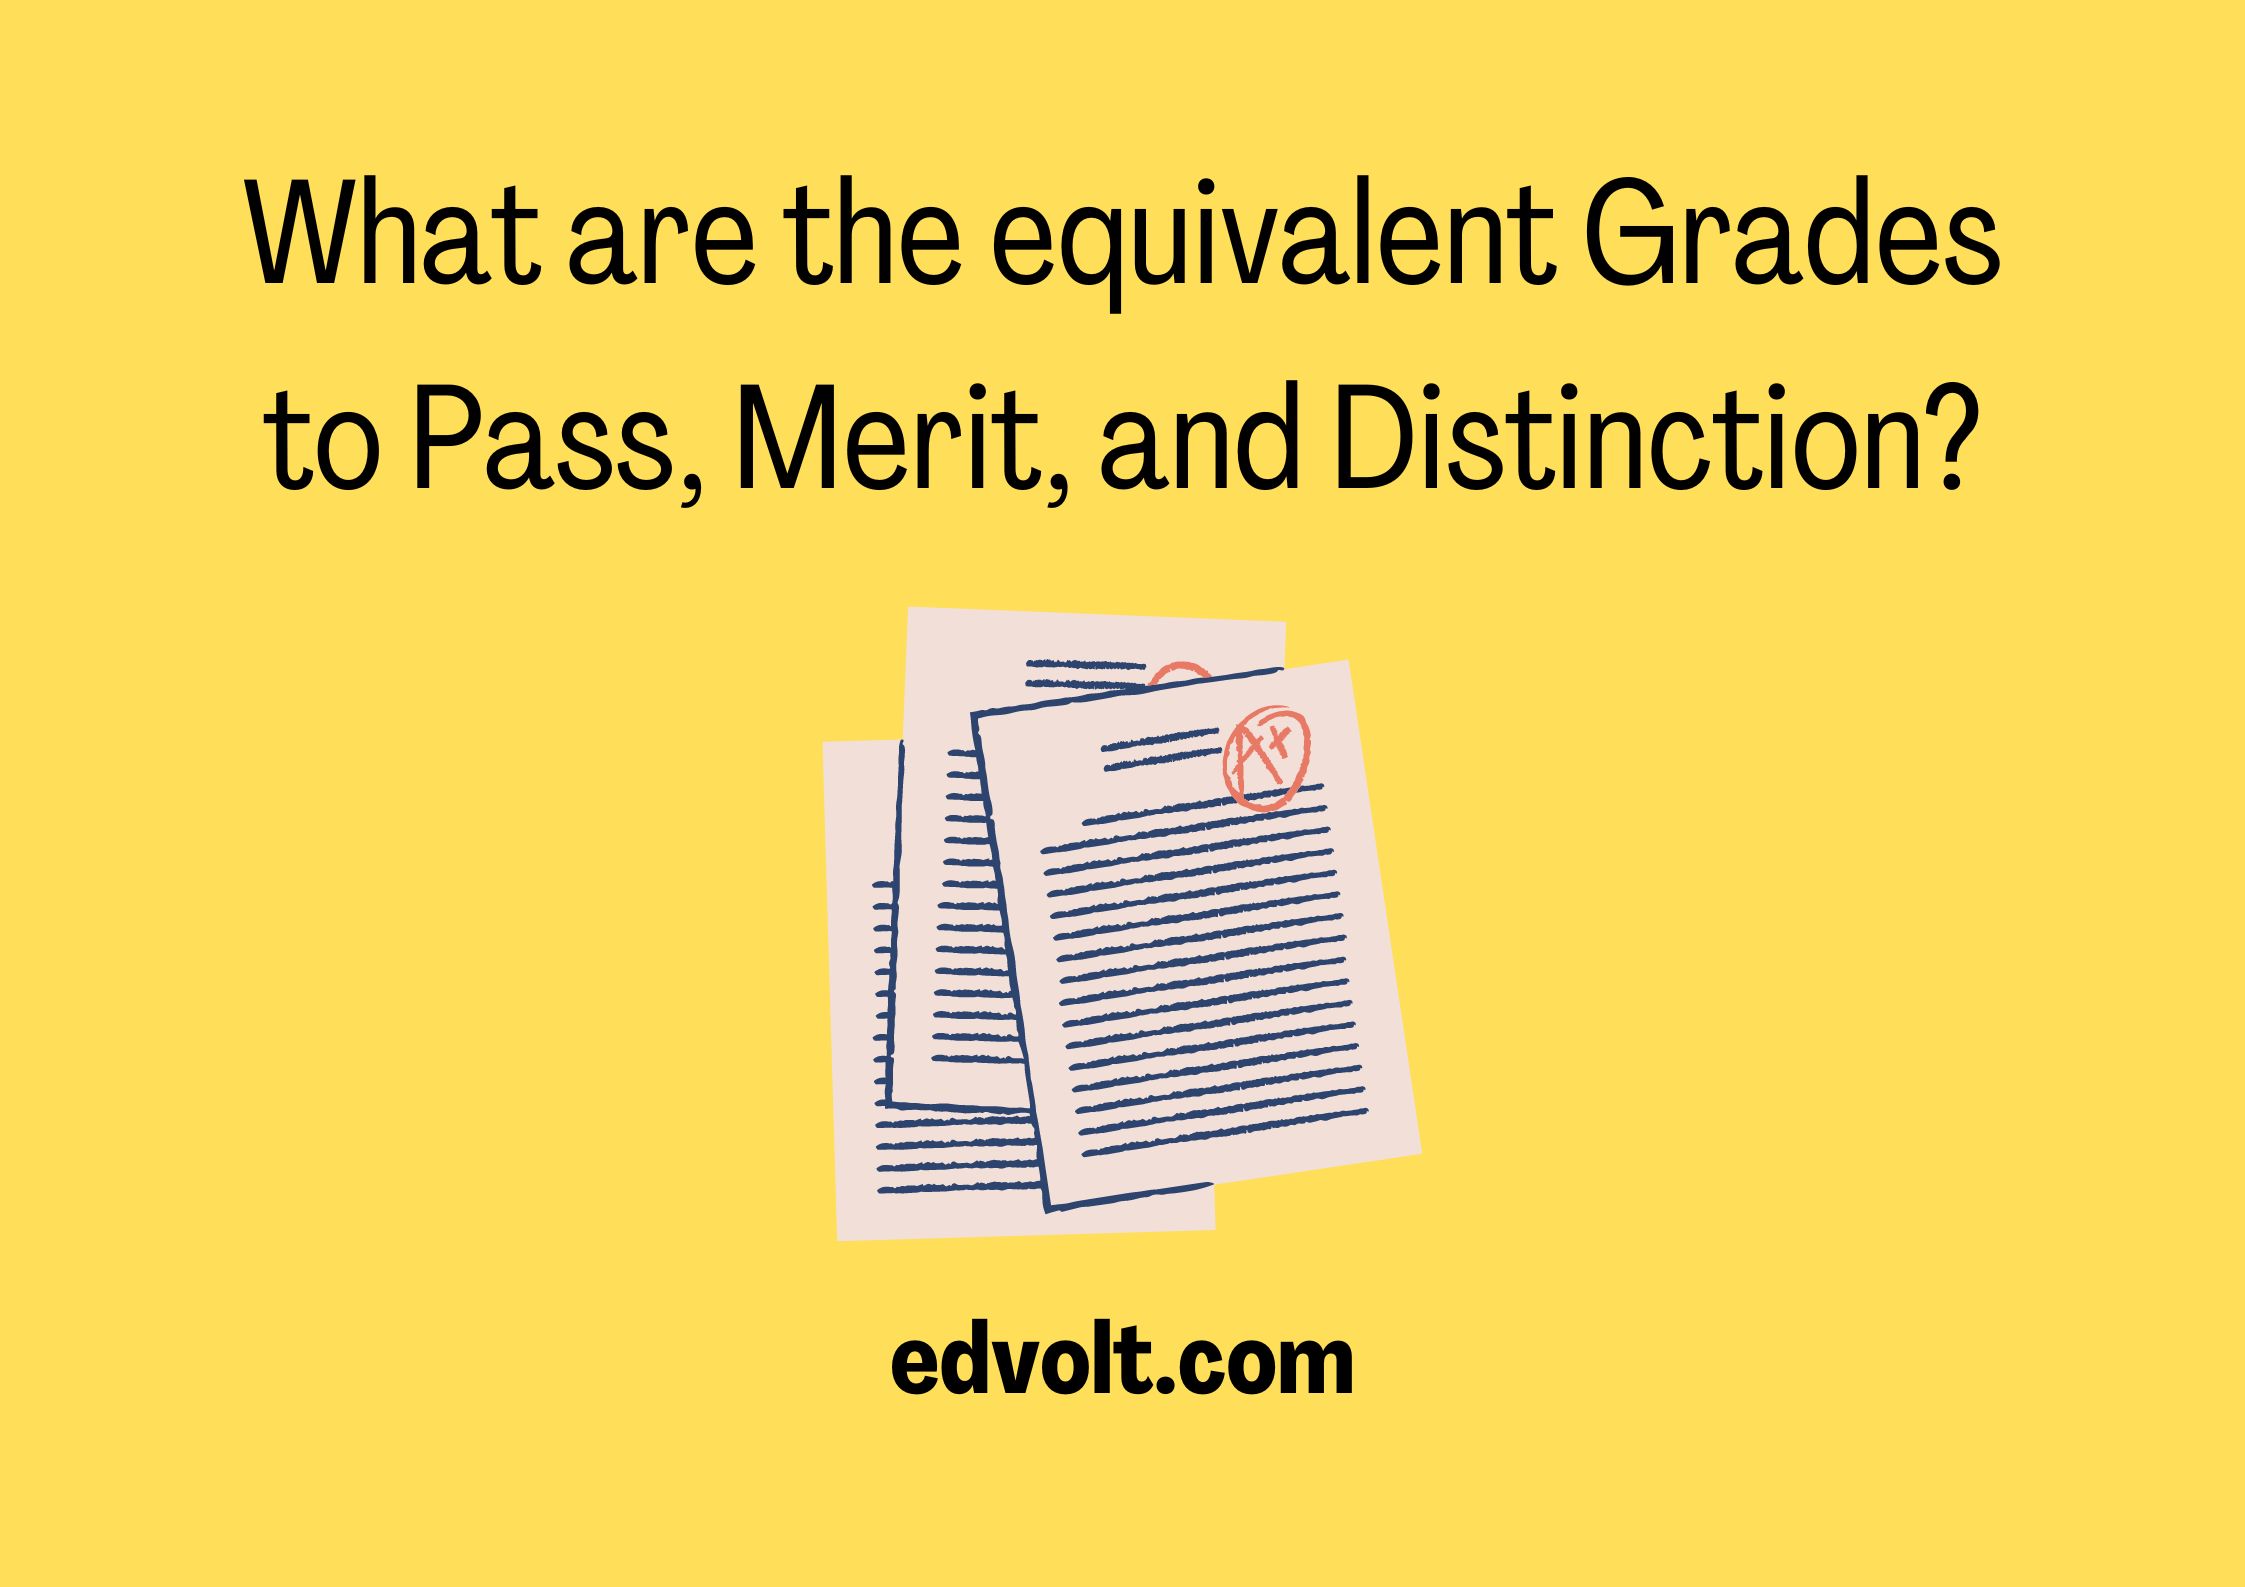 What are the equivalent Grades to Pass Merit and Distinction?